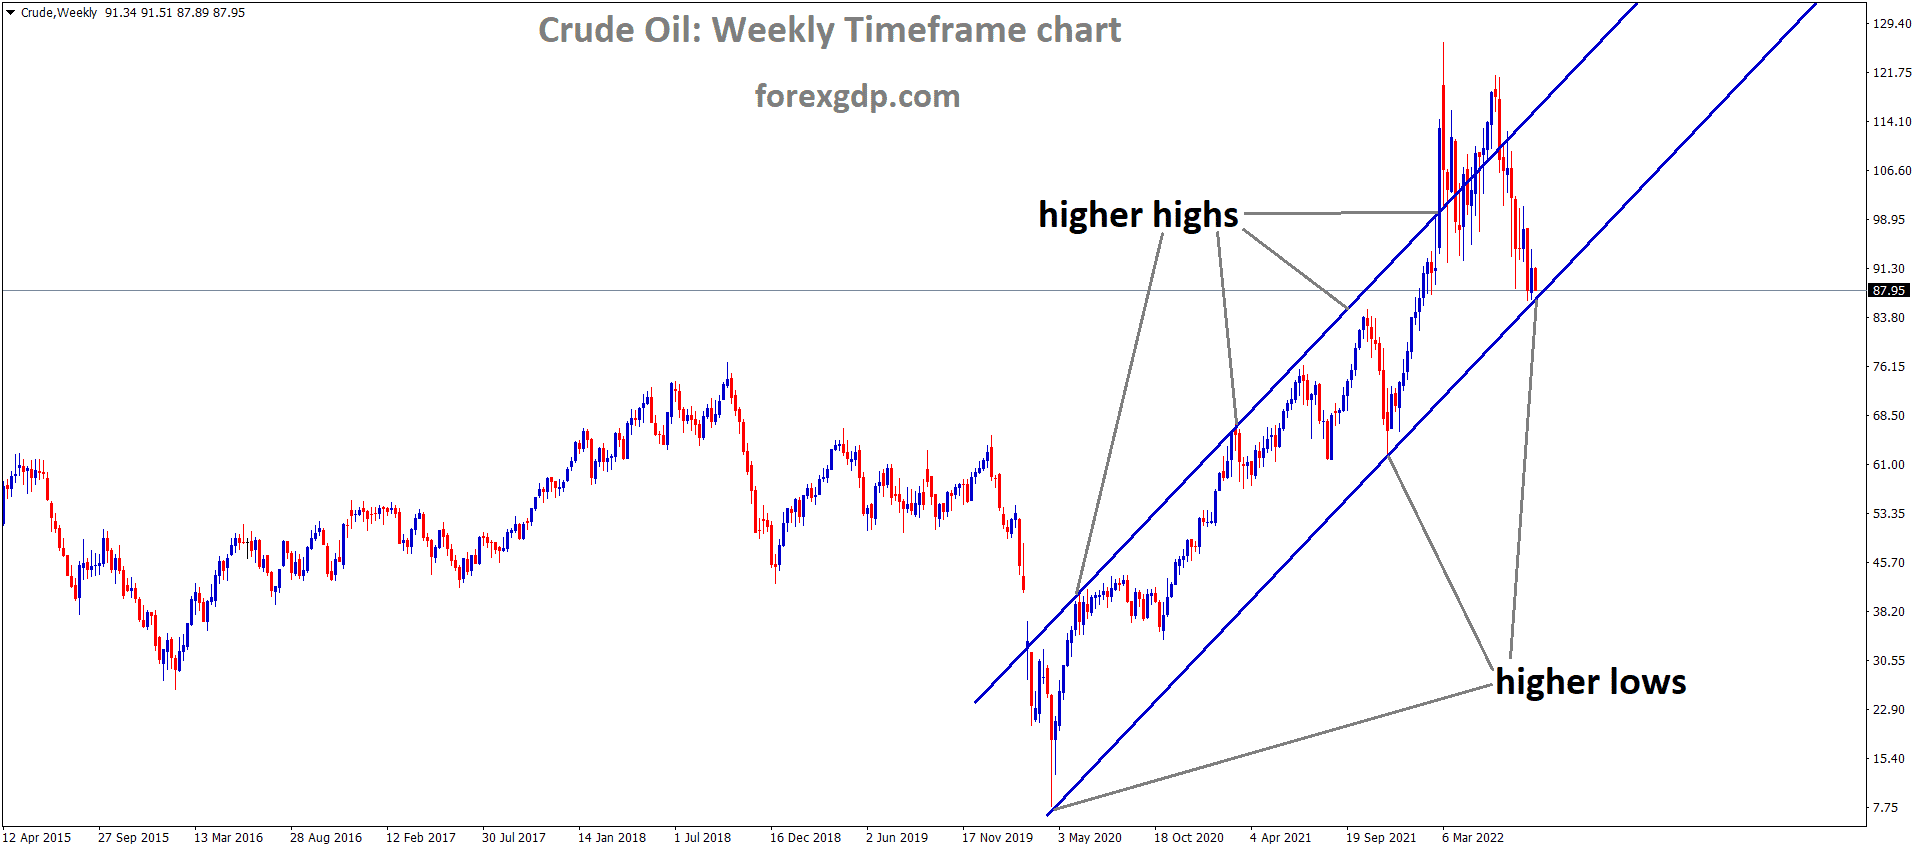 Crude oil is moving in an Ascending channel and the Market has reached the higher low area of the channel 1